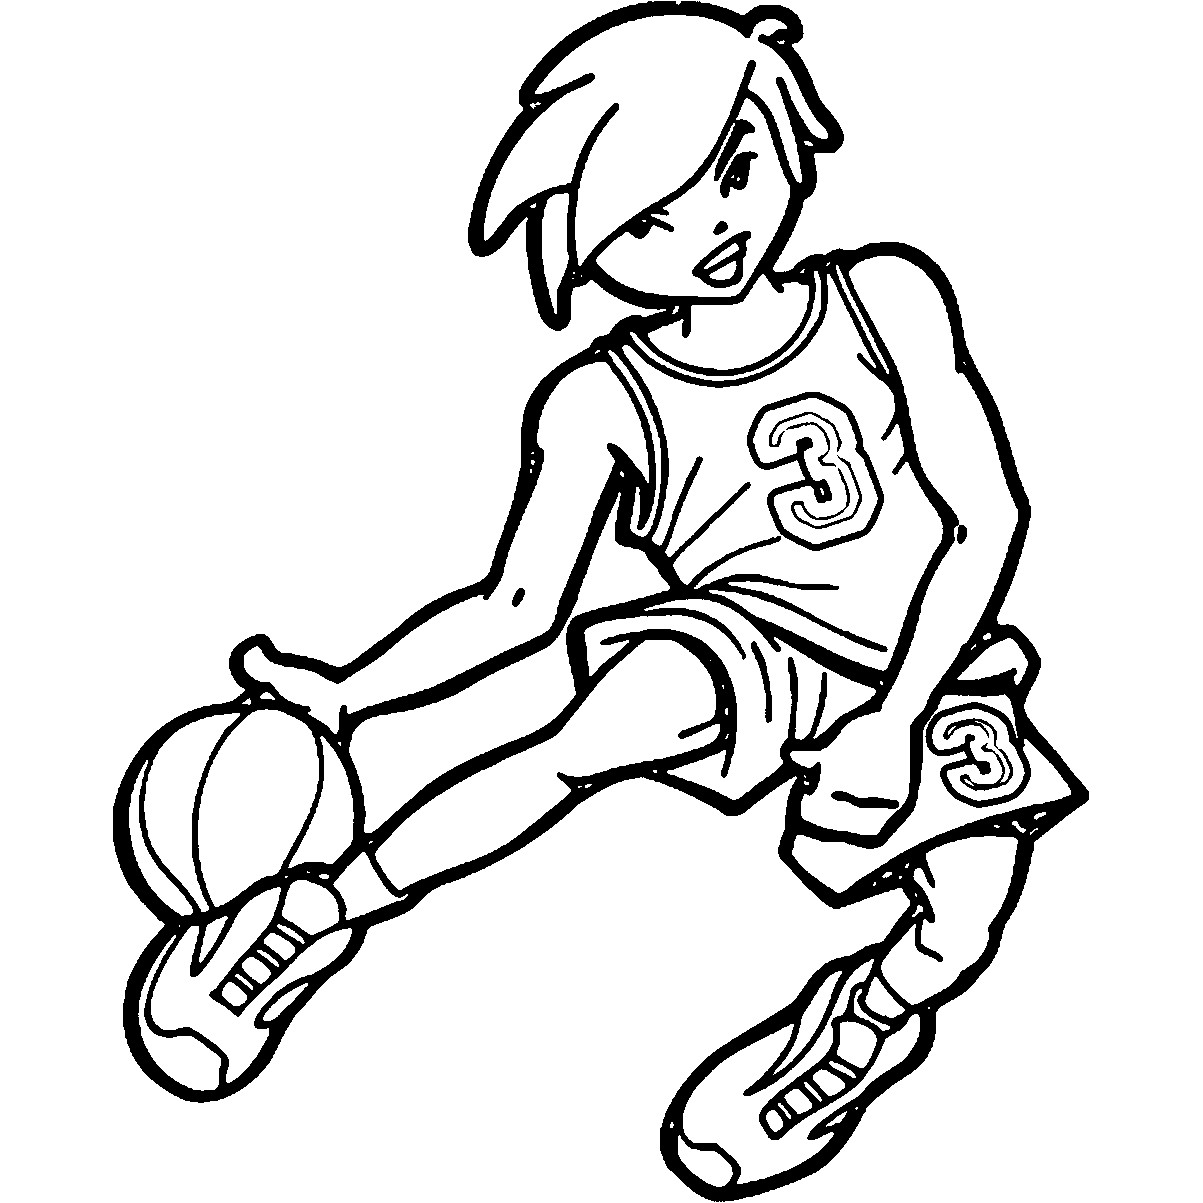 Basketball Player Coloring Pages
 Playing Basketball Coloring Pages